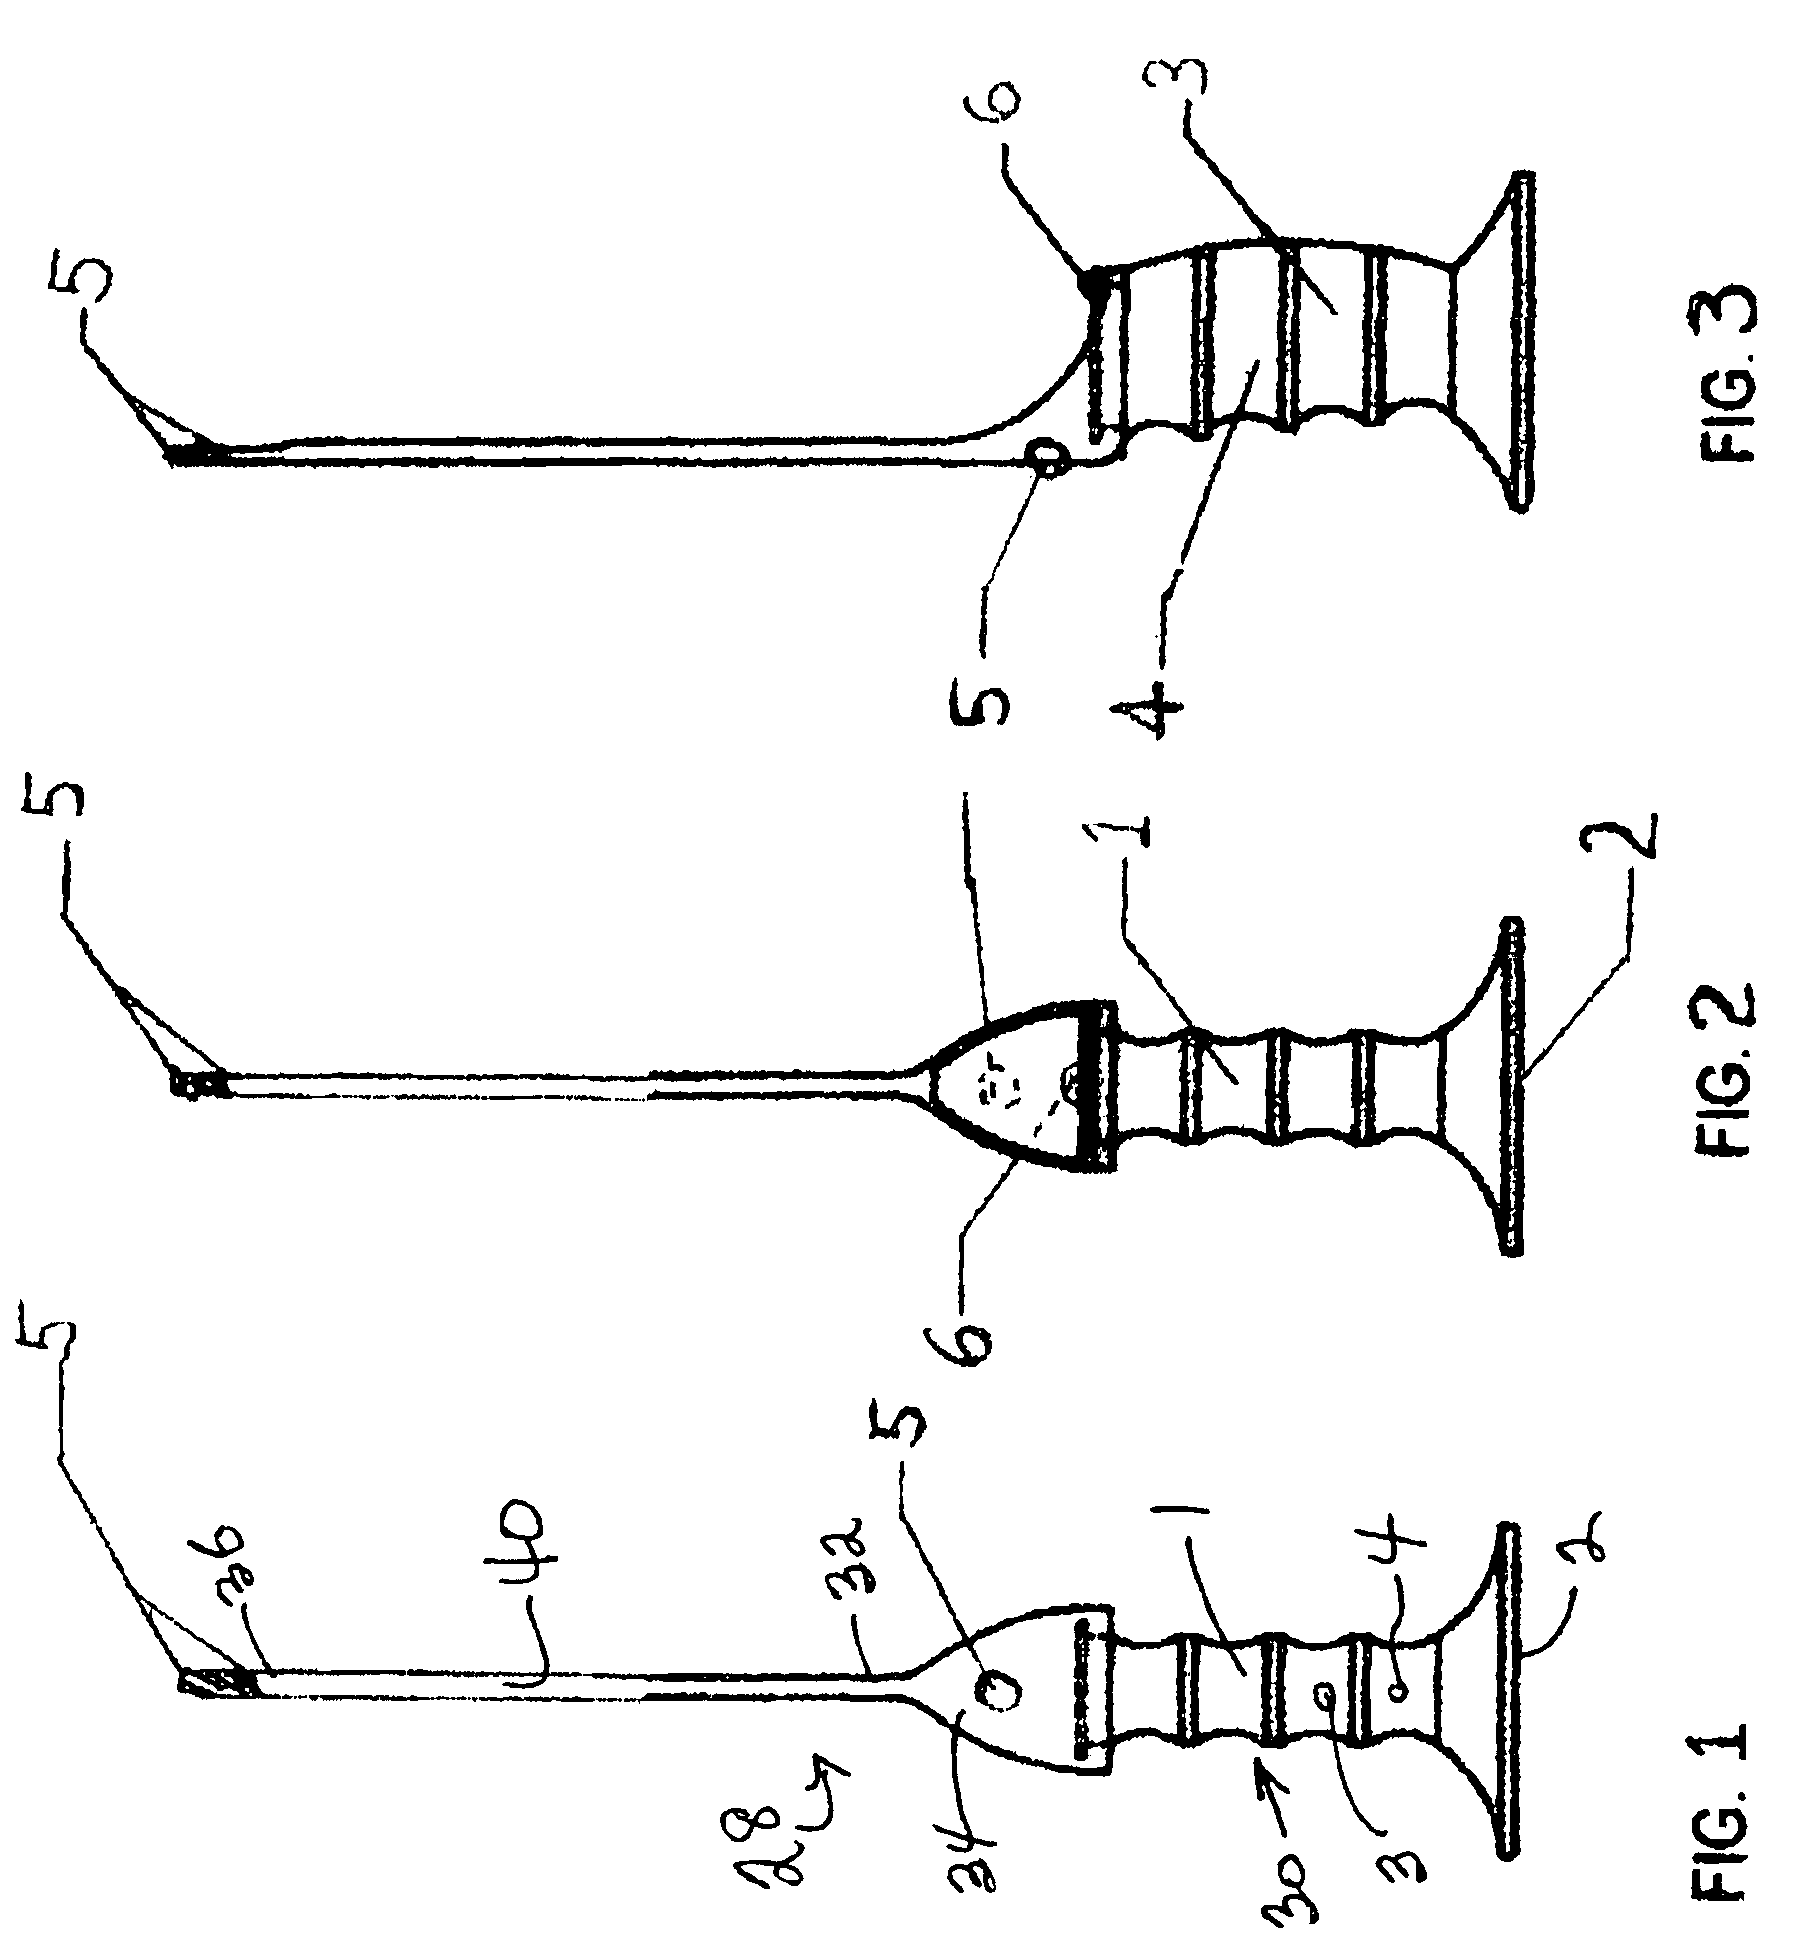 Apparatus and method for the treatment of computer vision syndrome